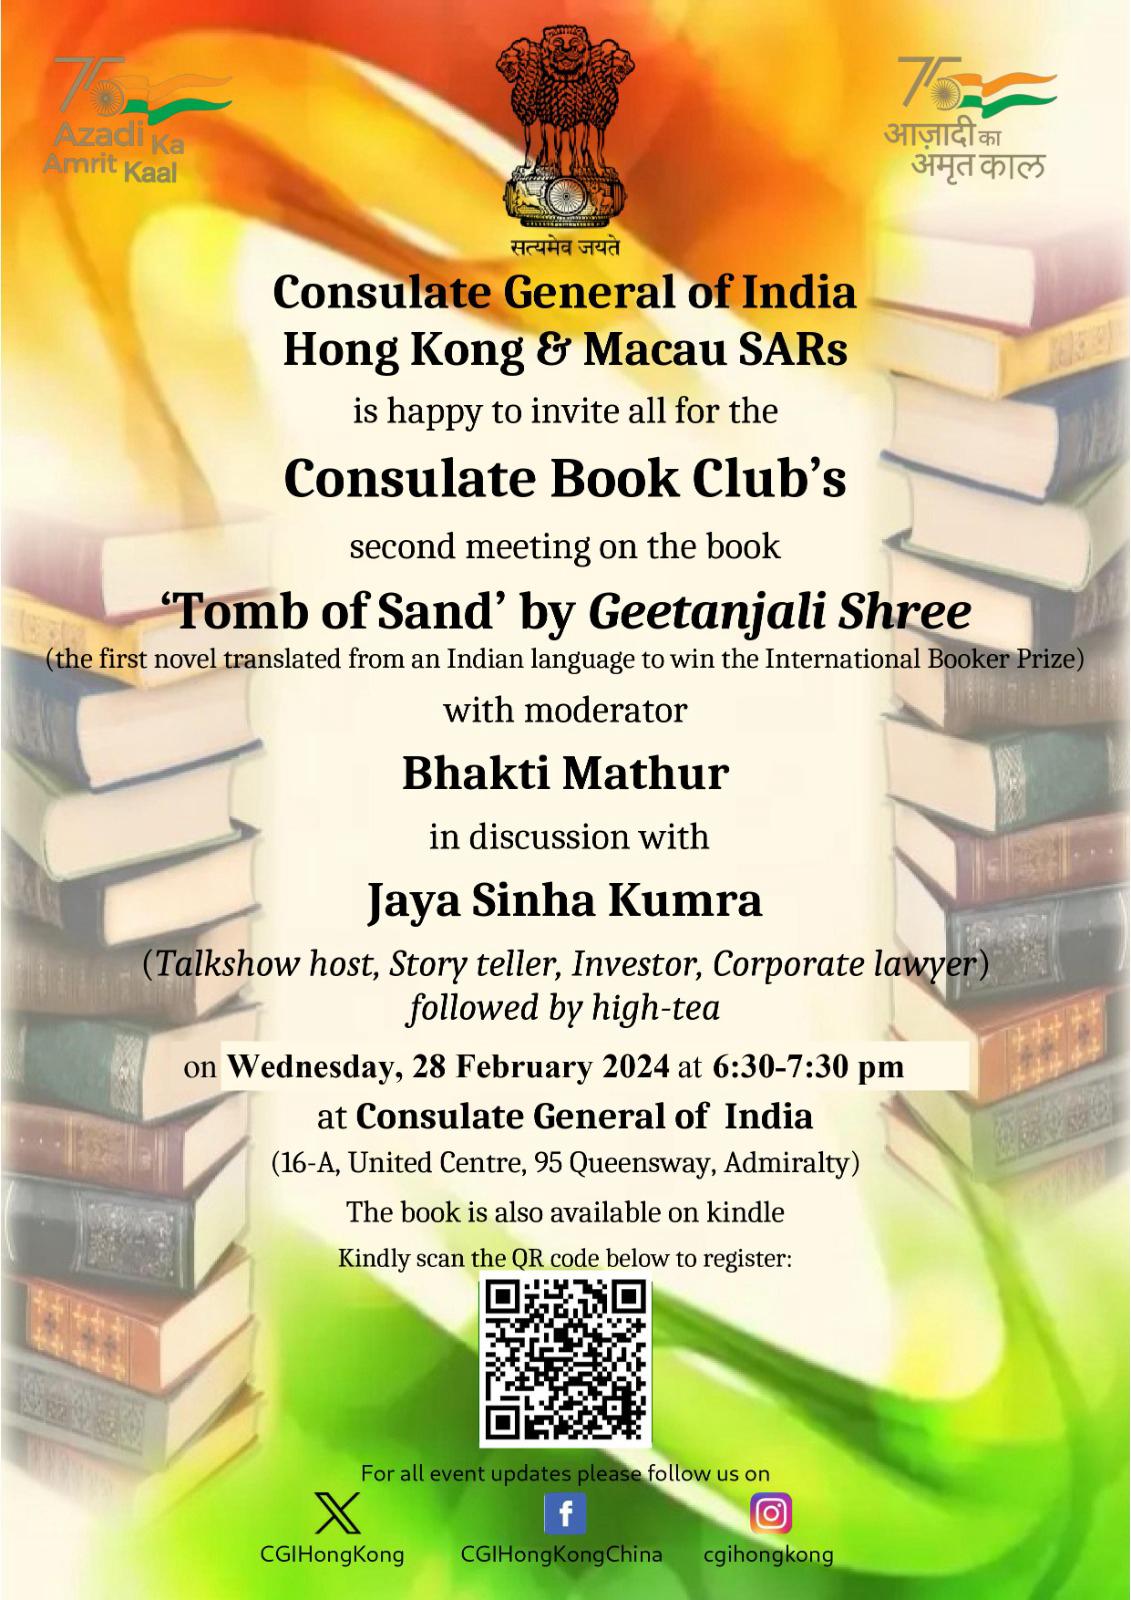 2nd meeting of Consulate Book Club (28 February, 2024)